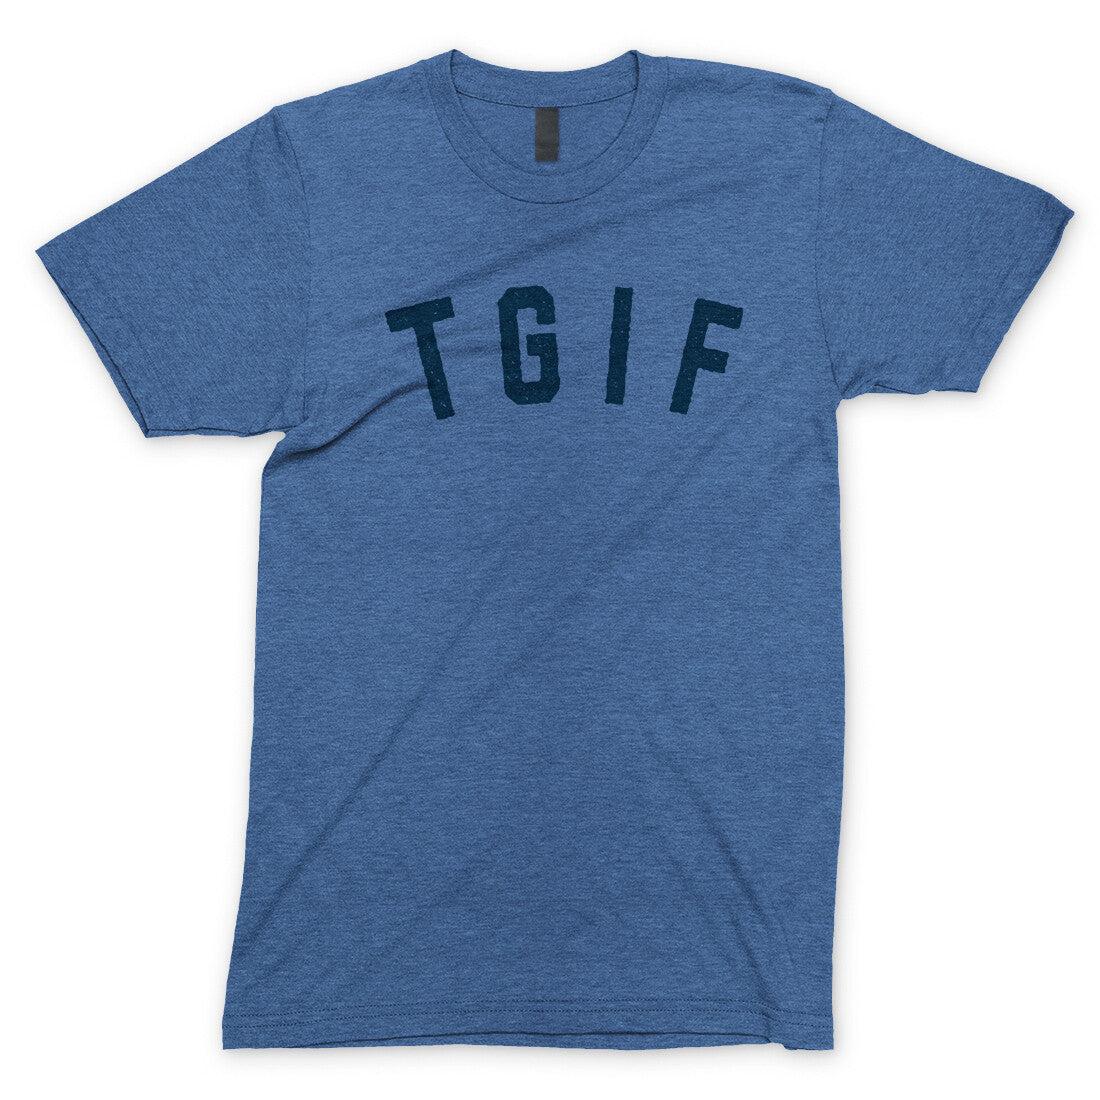 TGIF in Heather Royal Color